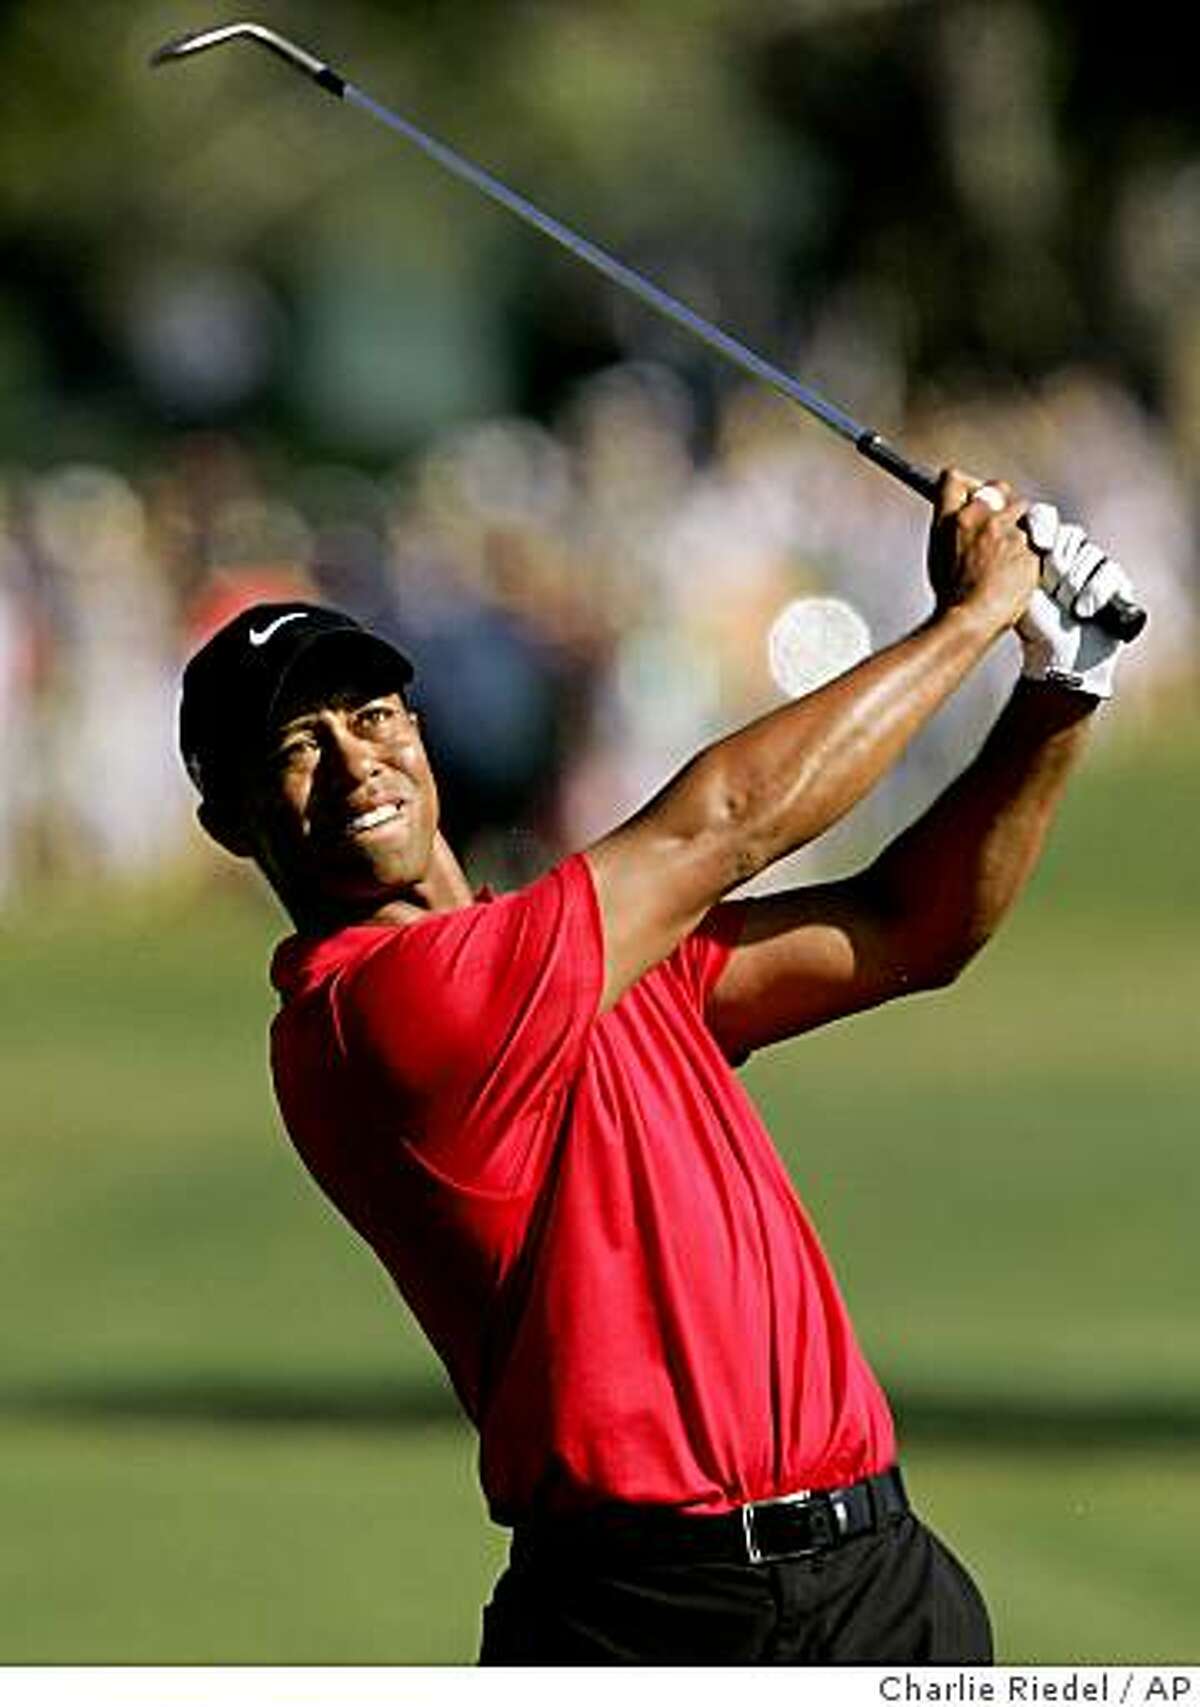 ** CORRECTS TO 253-DAY BREAK FROM 254-DAY BREAK ** FILE ** In this June 15, 2008, file photo, Tiger Woods tees off during the fourth round of the US Open championship at Torrey Pines Golf Course on in San Diego. Woods said on his Web site Thursday that he will defend his title next week in the Accenture Match Play Championship after a 253-day break from competition. (AP Photo/Charlie Riedel, File)